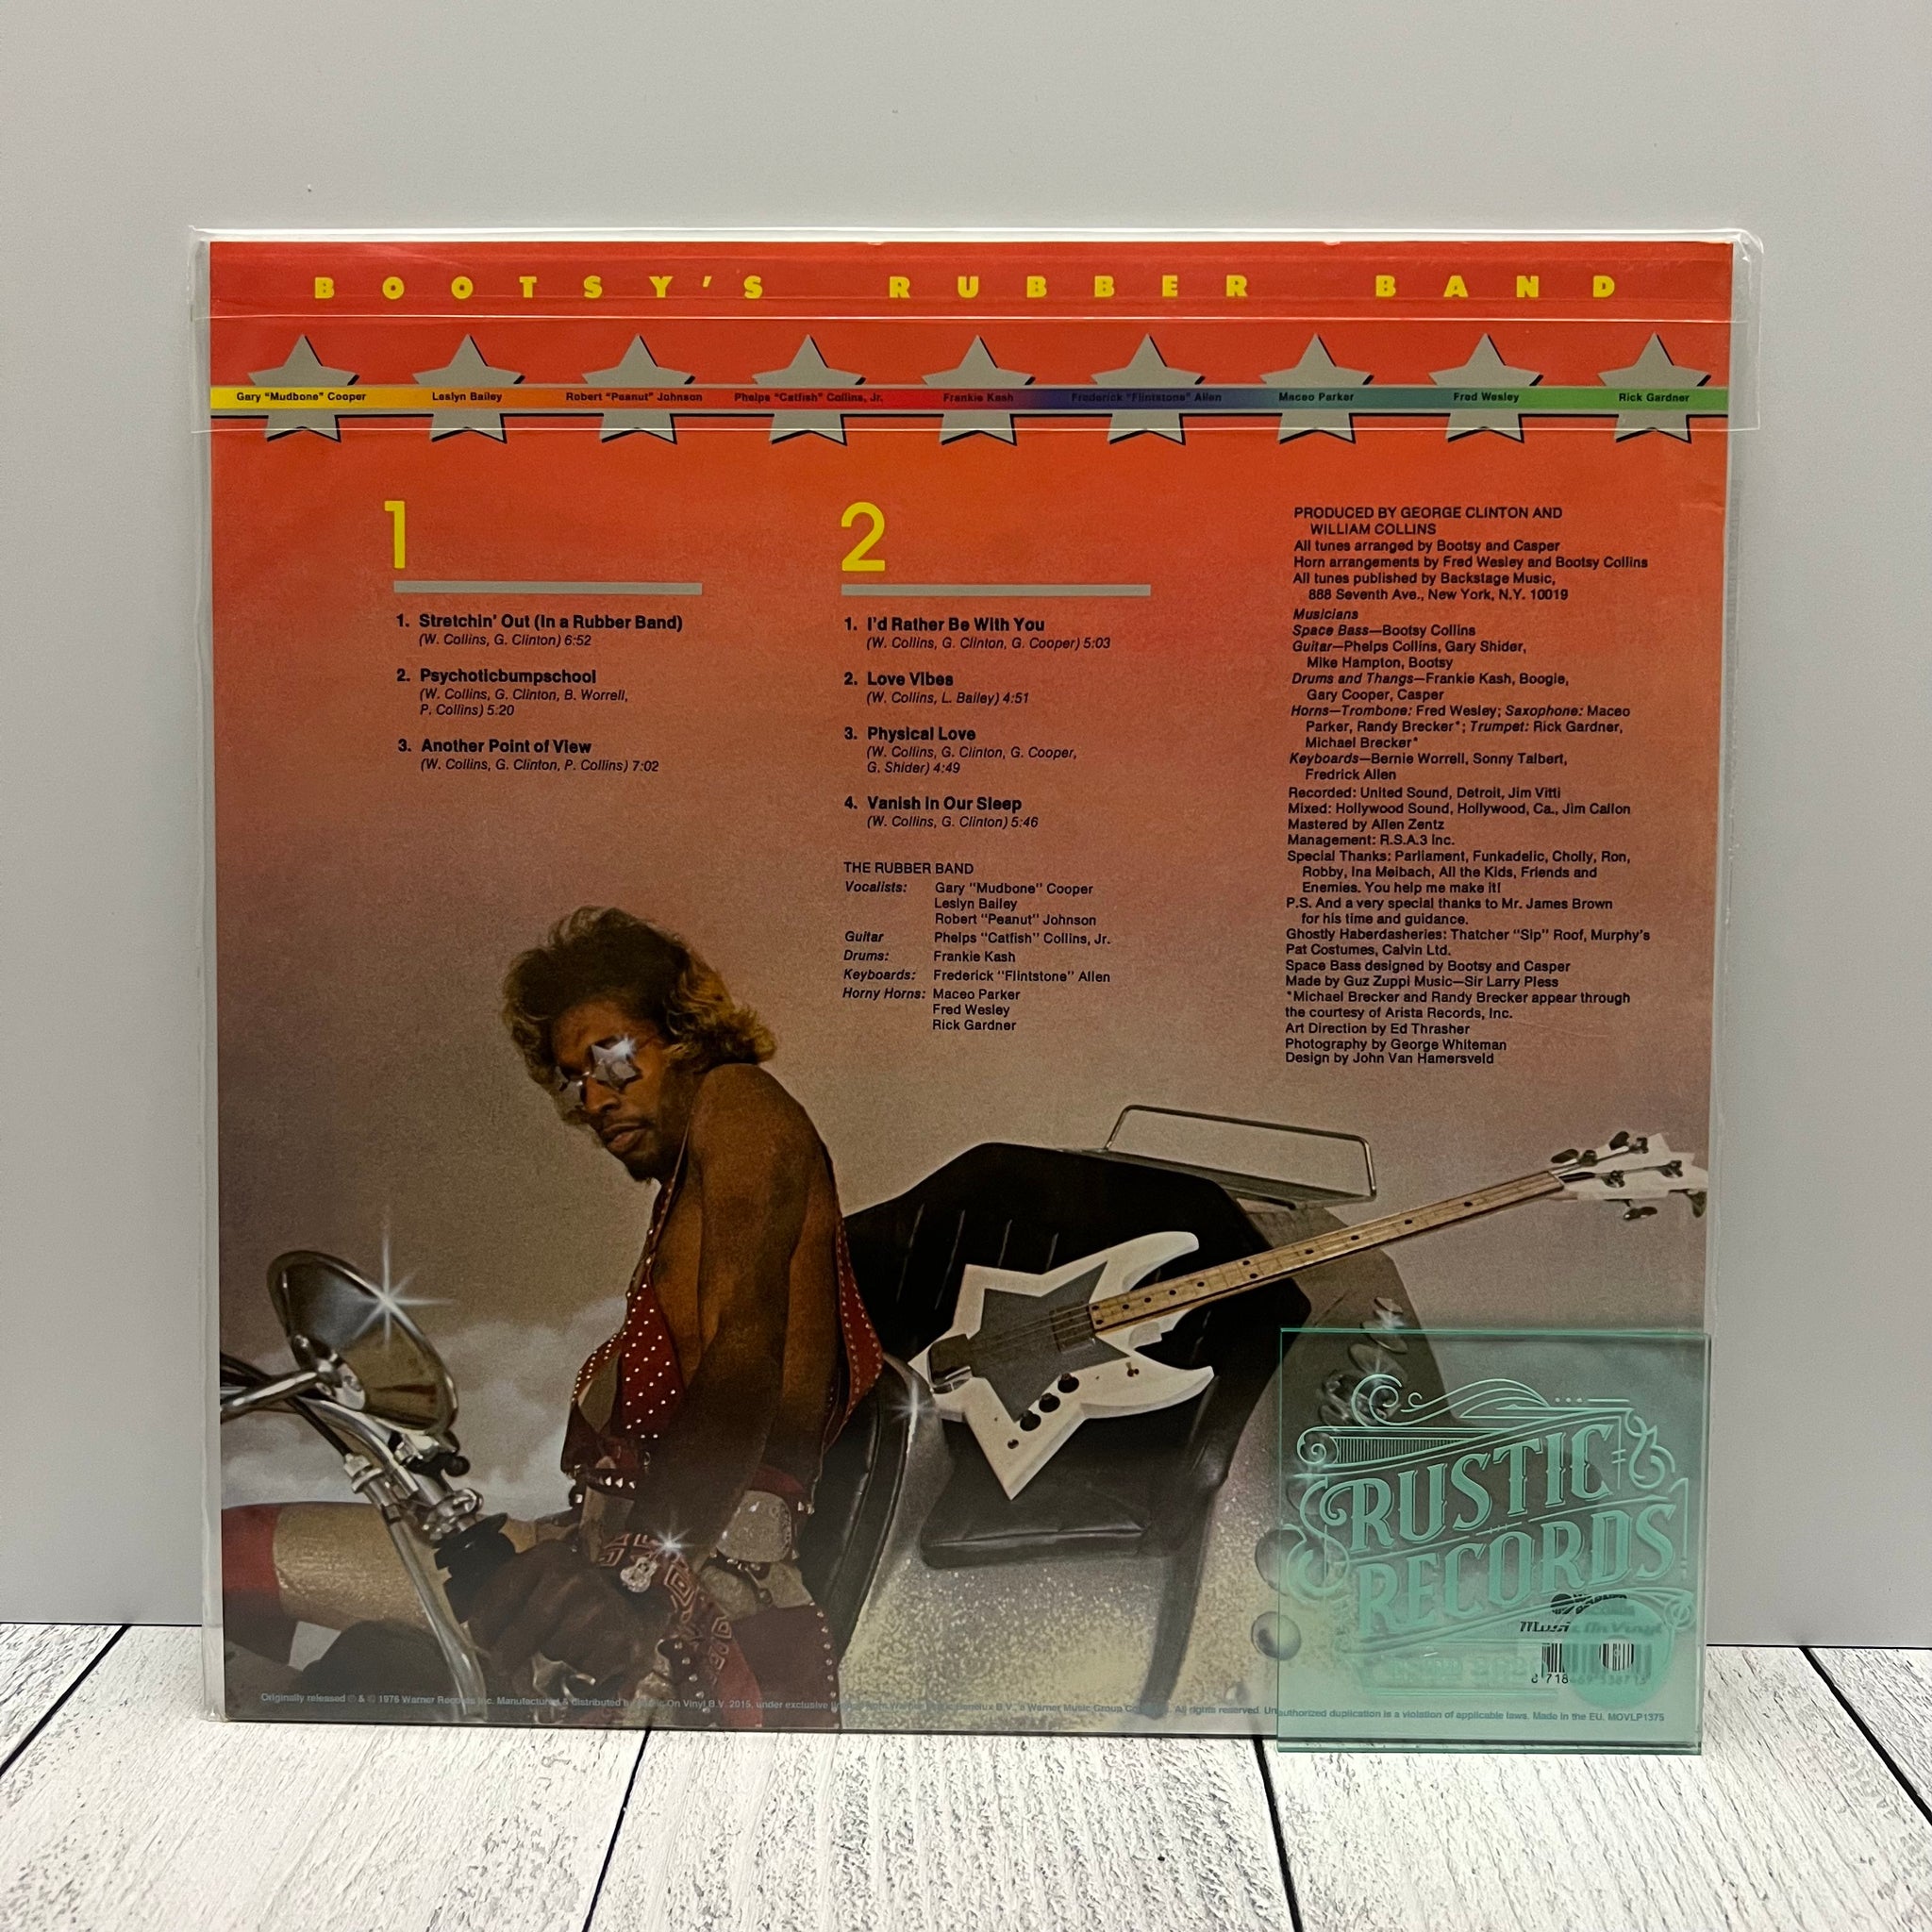 Bootsy Collins / Bootsy's Rubber Band - Stretchin' Out In Bootsy's Rubber Band (Music On Vinyl)